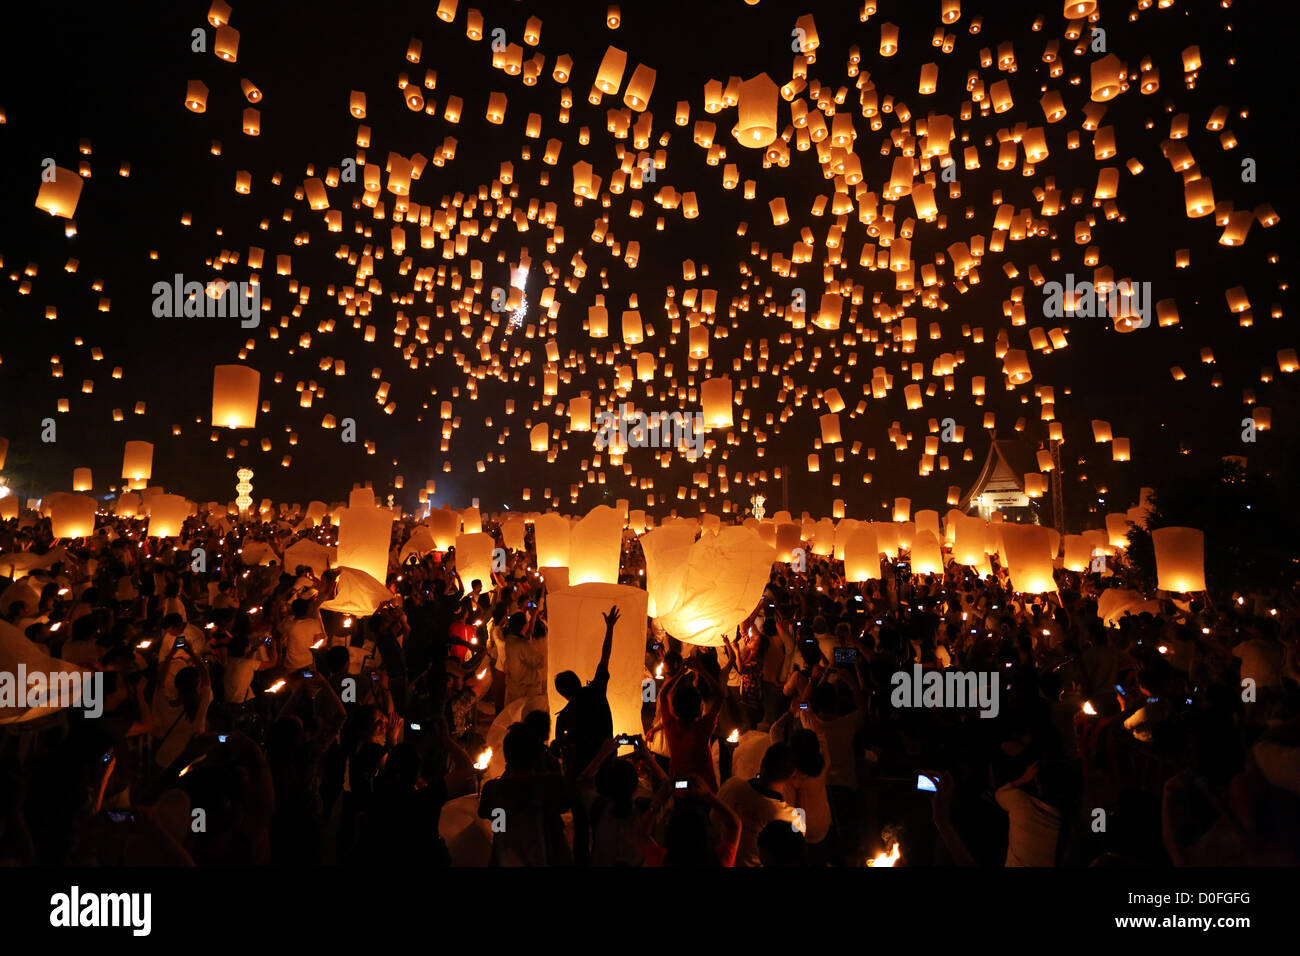 Chiang Mai, Thailand. 24th November 2012. Khom Loy Lanterns at the Yee Peng Sansai Floating Lantern Ceremony, part of the Loy Kratong celebrations in homage to Lord Buddha at Maejo, Chiang Mai, Thailand Stock Photo